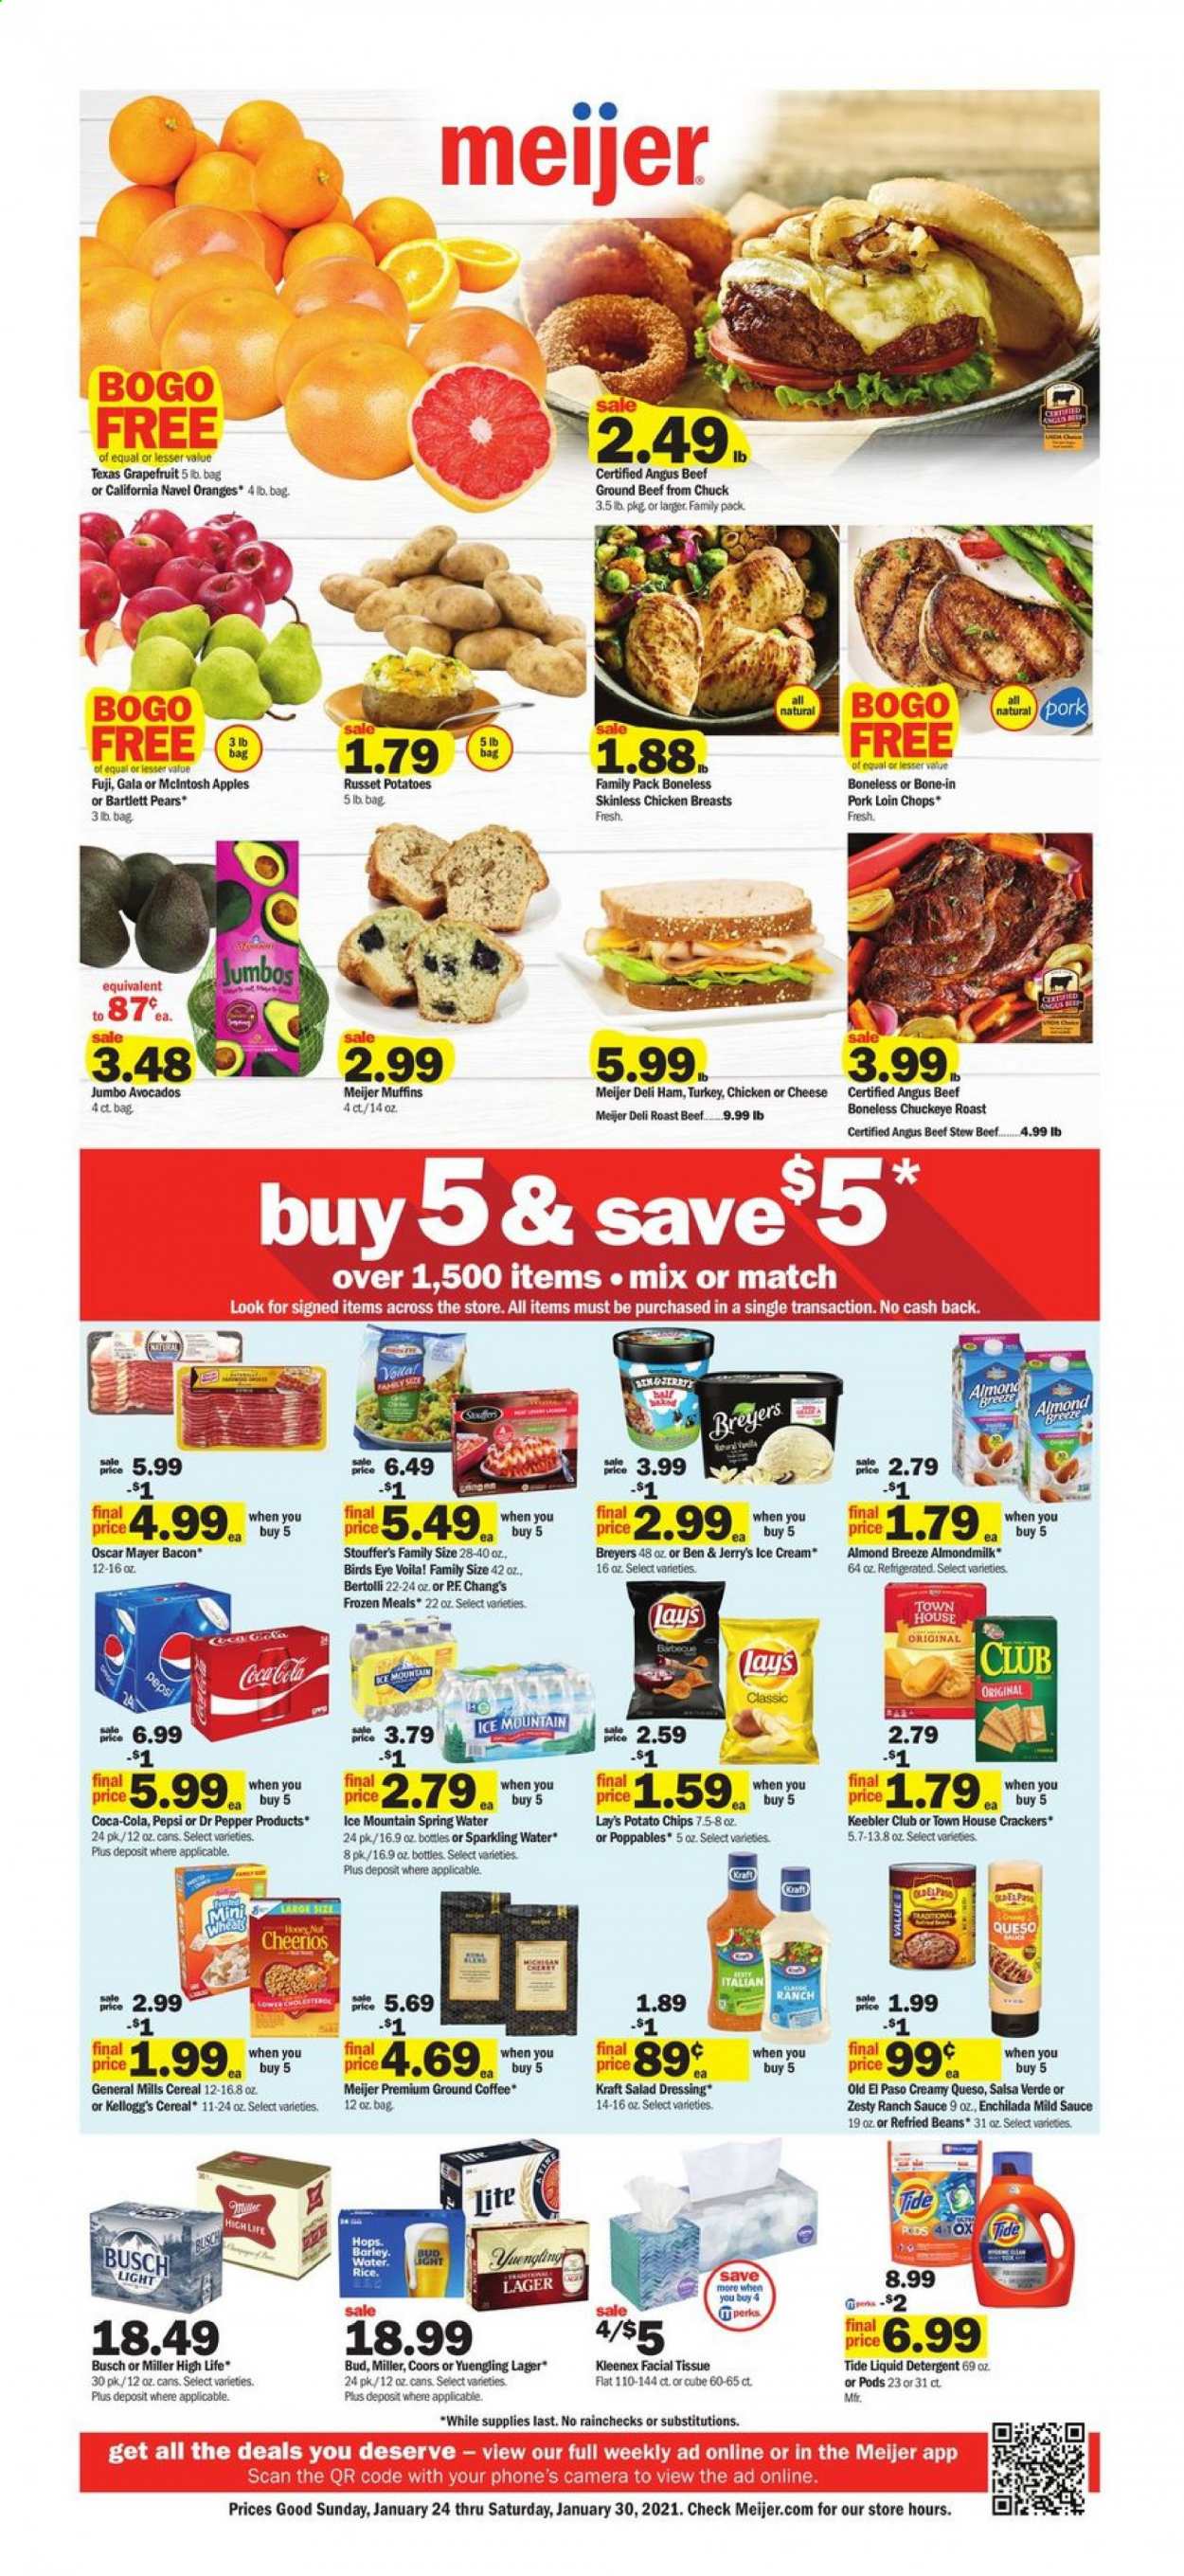 thumbnail - Meijer Flyer - 01/24/2021 - 01/30/2021 - Sales products - Bartlett pears, Old El Paso, muffin, pears, oranges, enchiladas, sauce, Bird's Eye, Kraft®, Bertolli, bacon, ham, Oscar Mayer, Almond Breeze, almond milk, salsa, ice cream, Ben & Jerry's, beans, Stouffer's, crackers, Kellogg's, Keebler, potato chips, Lay’s, refried beans, cereals, Cheerios, salad dressing, dressing, Coca-Cola, Pepsi, Dr. Pepper, spring water, sparkling water, Ice Mountain, coffee, ground coffee, beer, Coors, Yuengling, Busch, Bud Light, Miller, Lager, chicken breasts, beef meat, ground beef, roast beef, chuck roast, pork loin, pork meat, Kleenex, tissues, detergent, Tide, liquid detergent. Page 1.